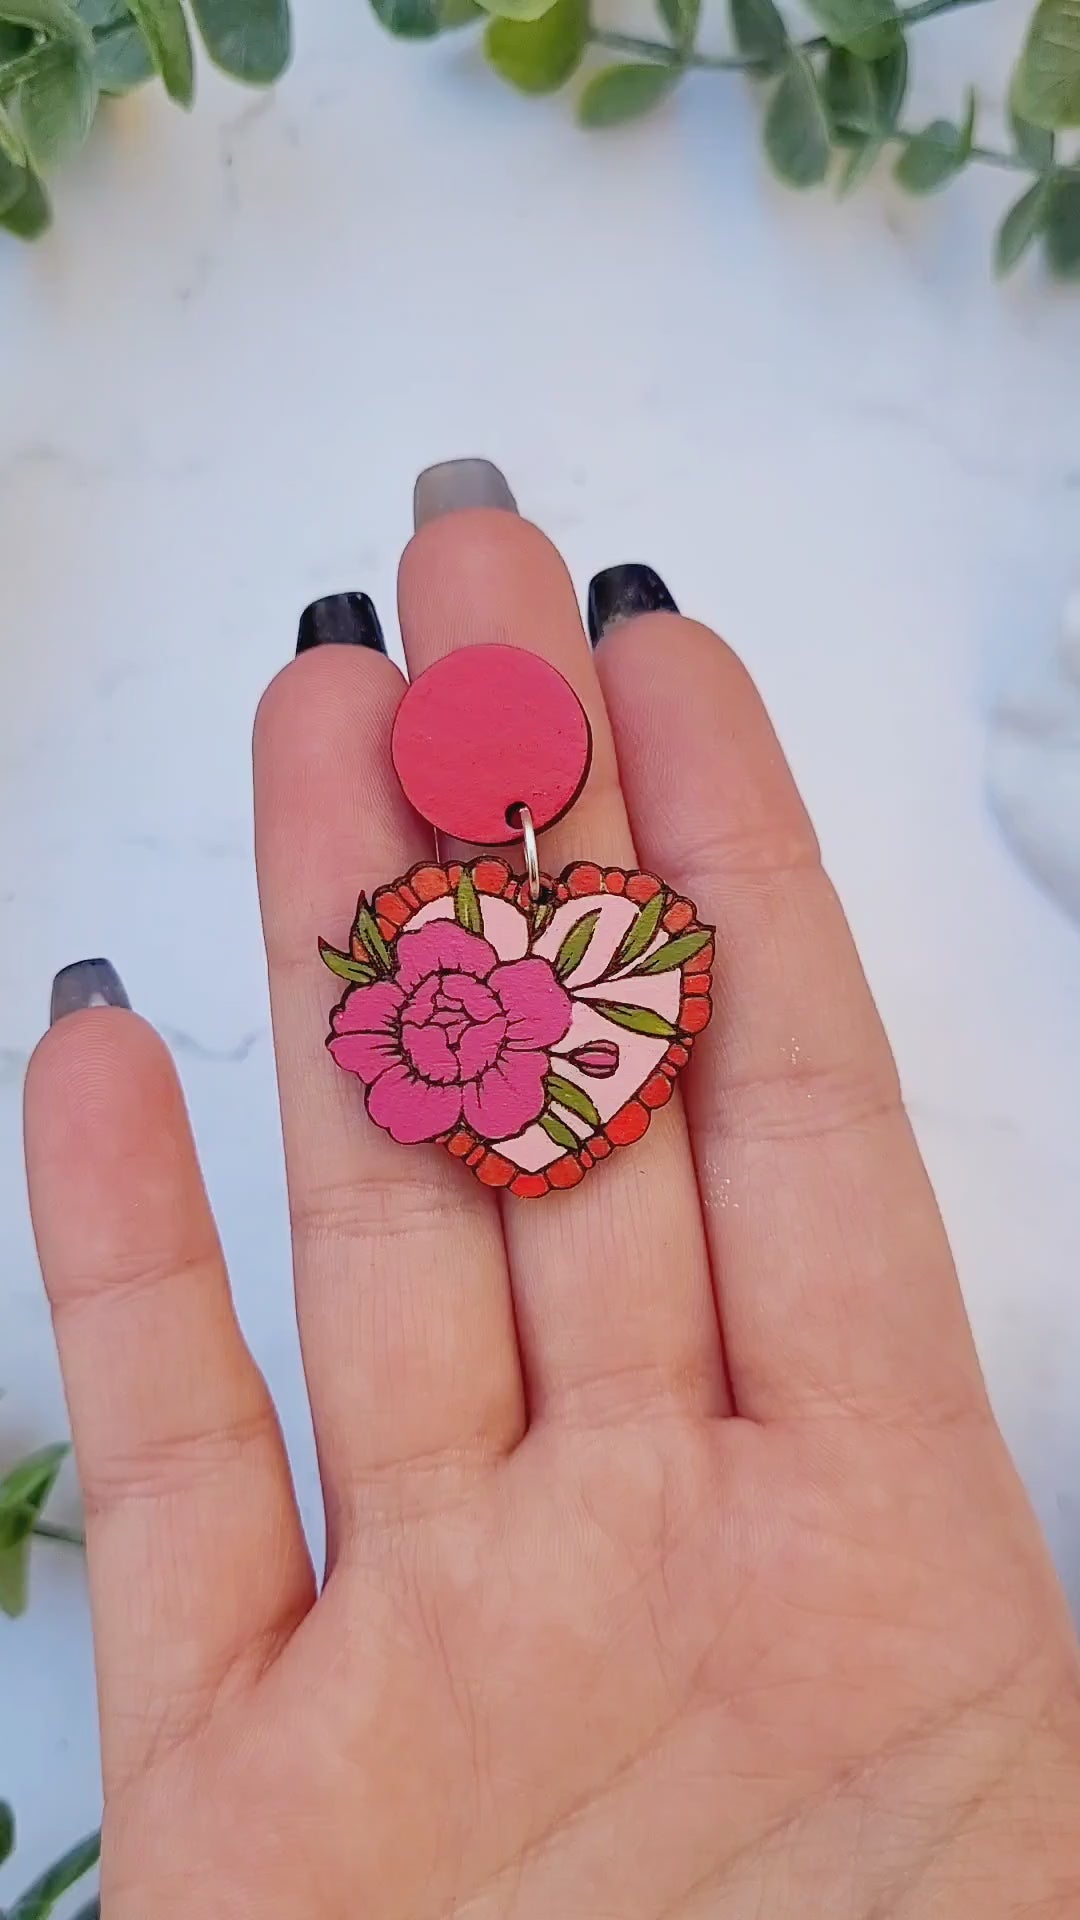 video close up of Rose tattoo earrings on a white marble background surrounded by foliage.